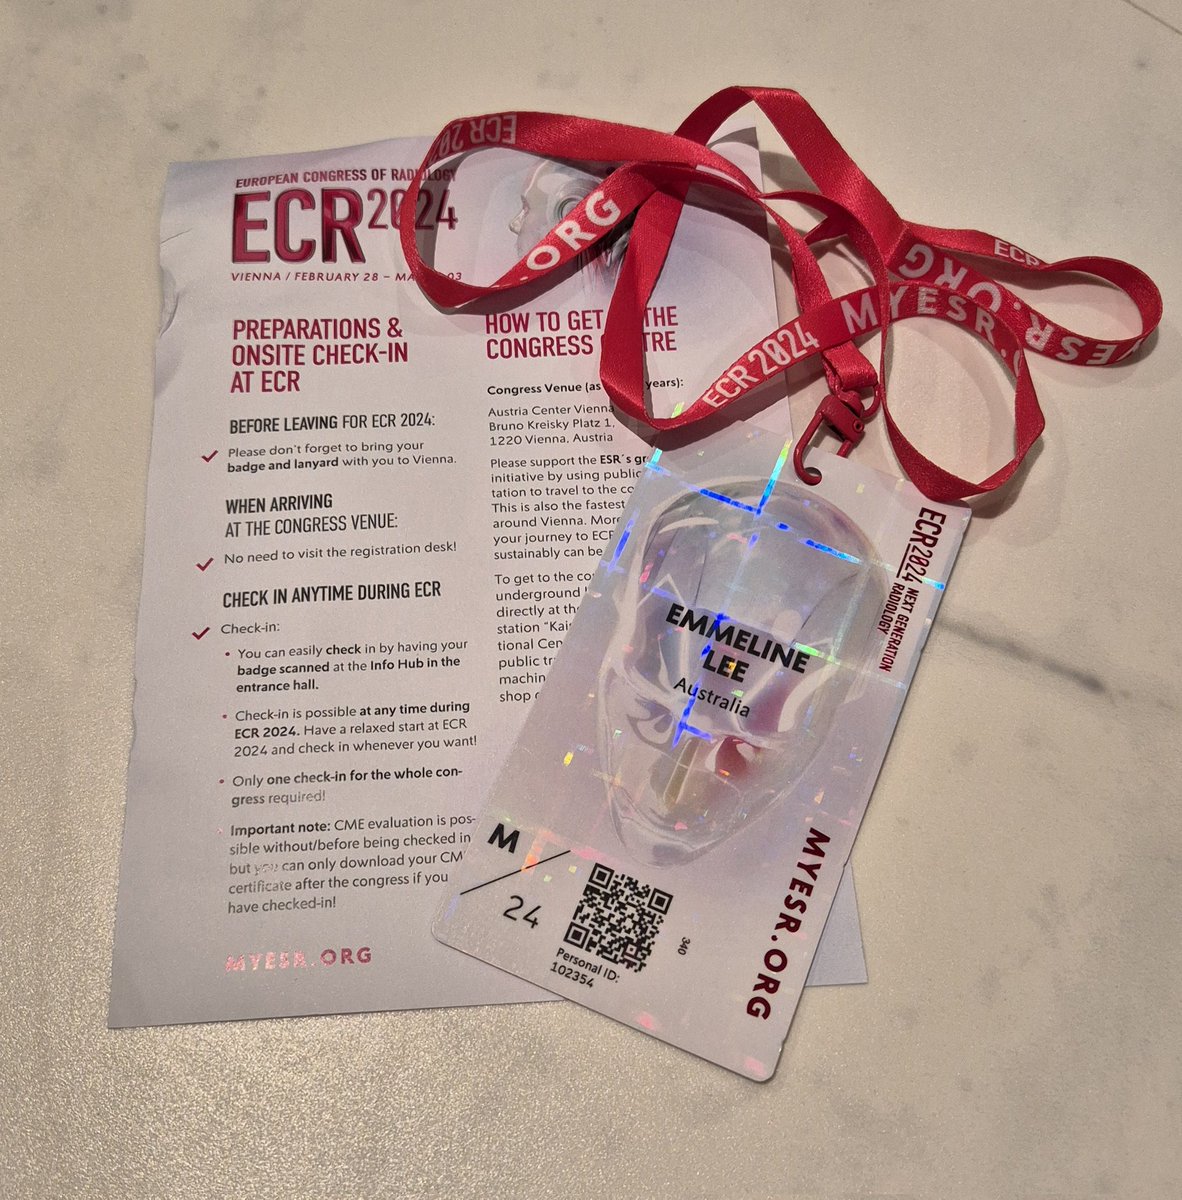 I'm *super* excited about attending my first #ecr2024 in Vienna this week. Cannot wait to meet up with friends and colleagues from around the world! Please get in touch if you'd like to join me on my quest to find the best sachertorte in town!